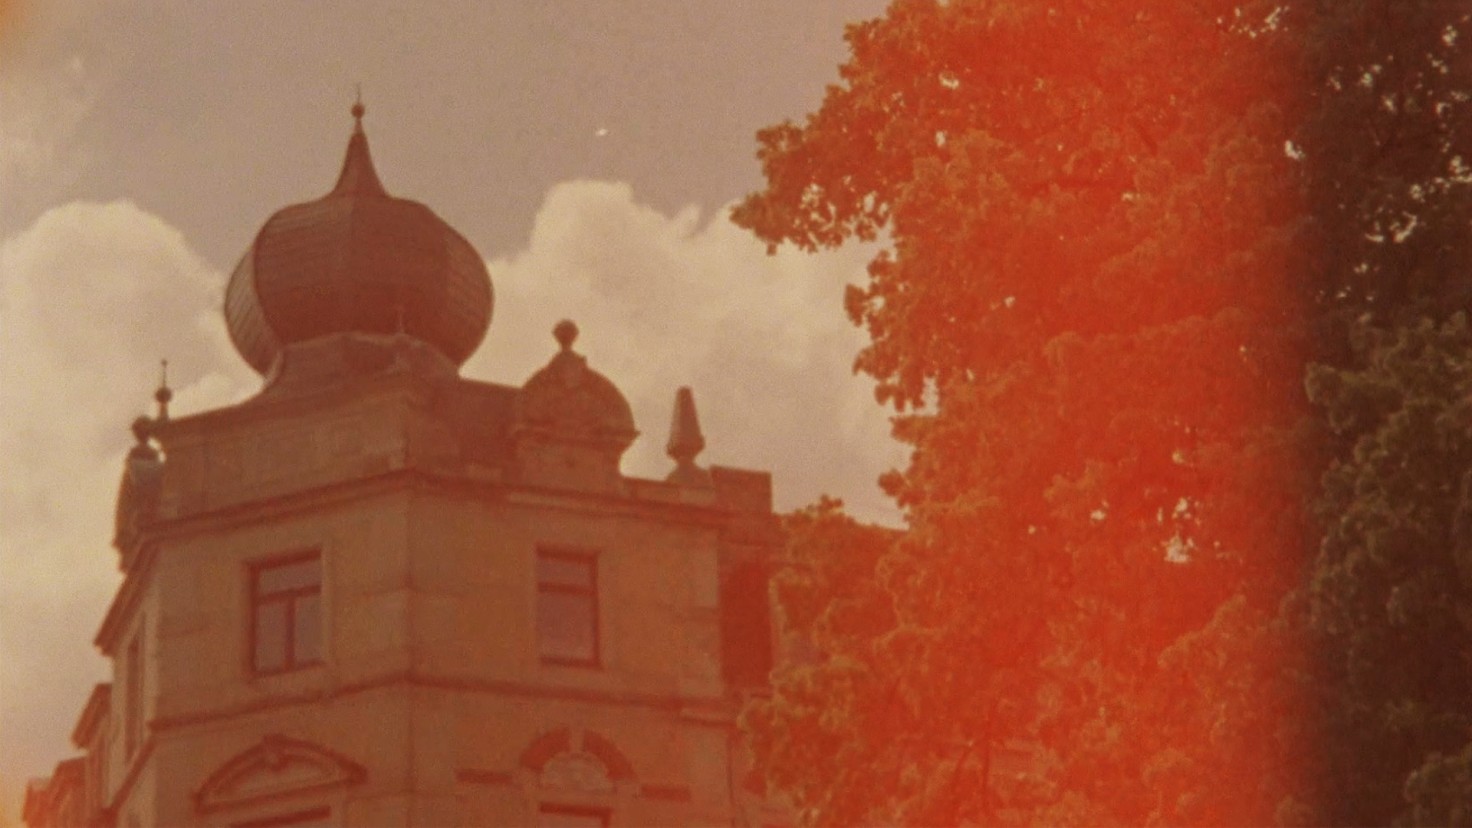 Still from film Drei Atlas (Three Atlas) directed by Miryam Charles. A building with a tree in the foreground, with orange film fading coloring the image